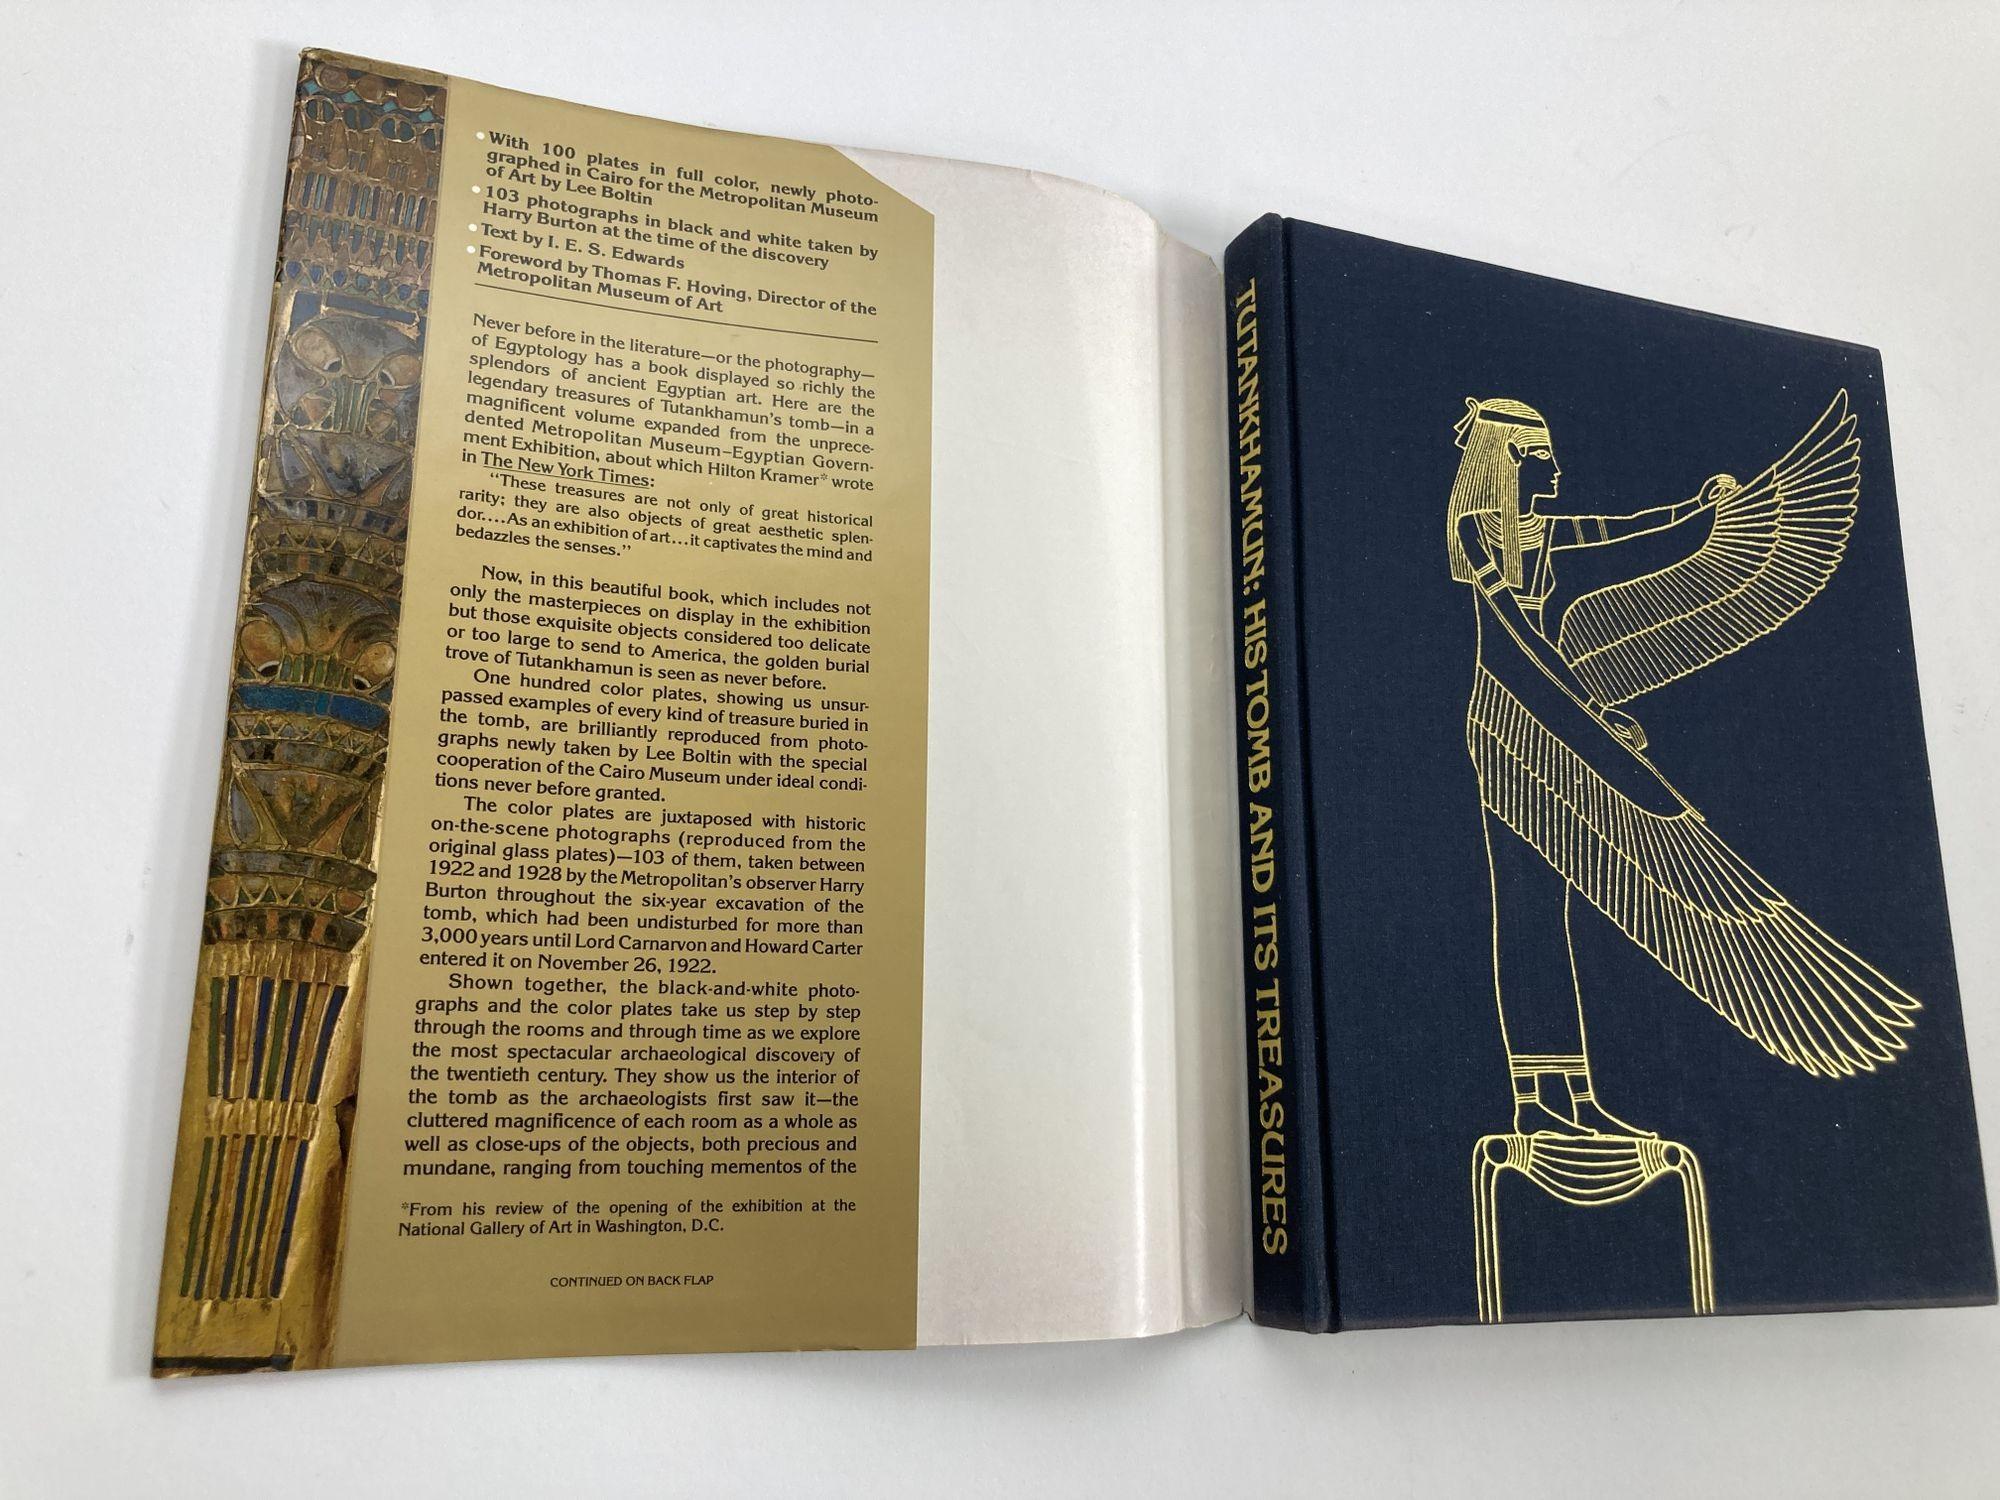 Paper Tutankhamun: His Tomb and Its Treasures Hardcover Book